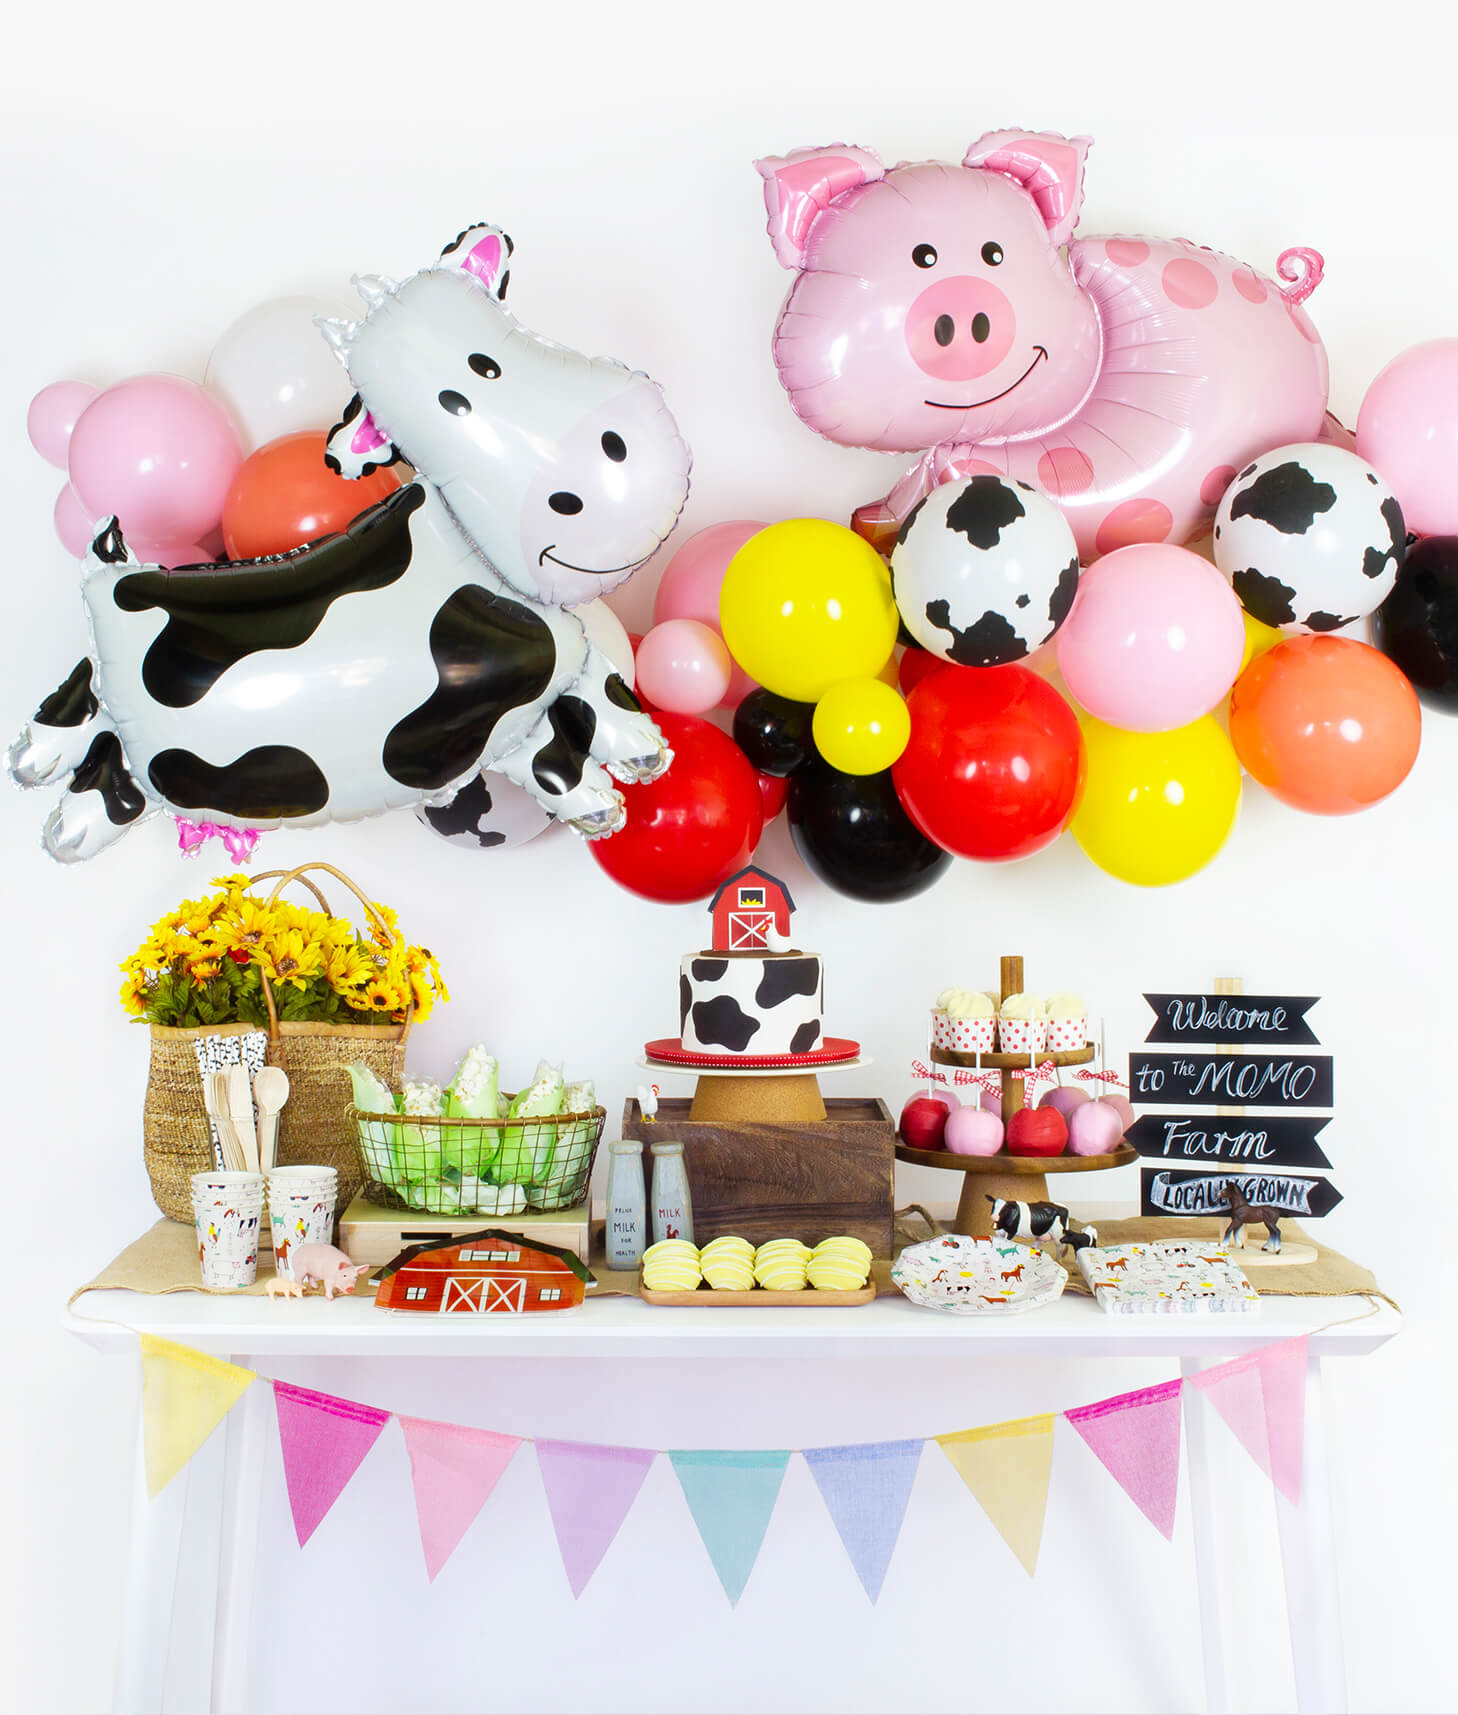 Momo Party Dessert table set up and wall decoration inspiration for Barn yard, Farm, Animals Birthday Party, kids 1st birthday party